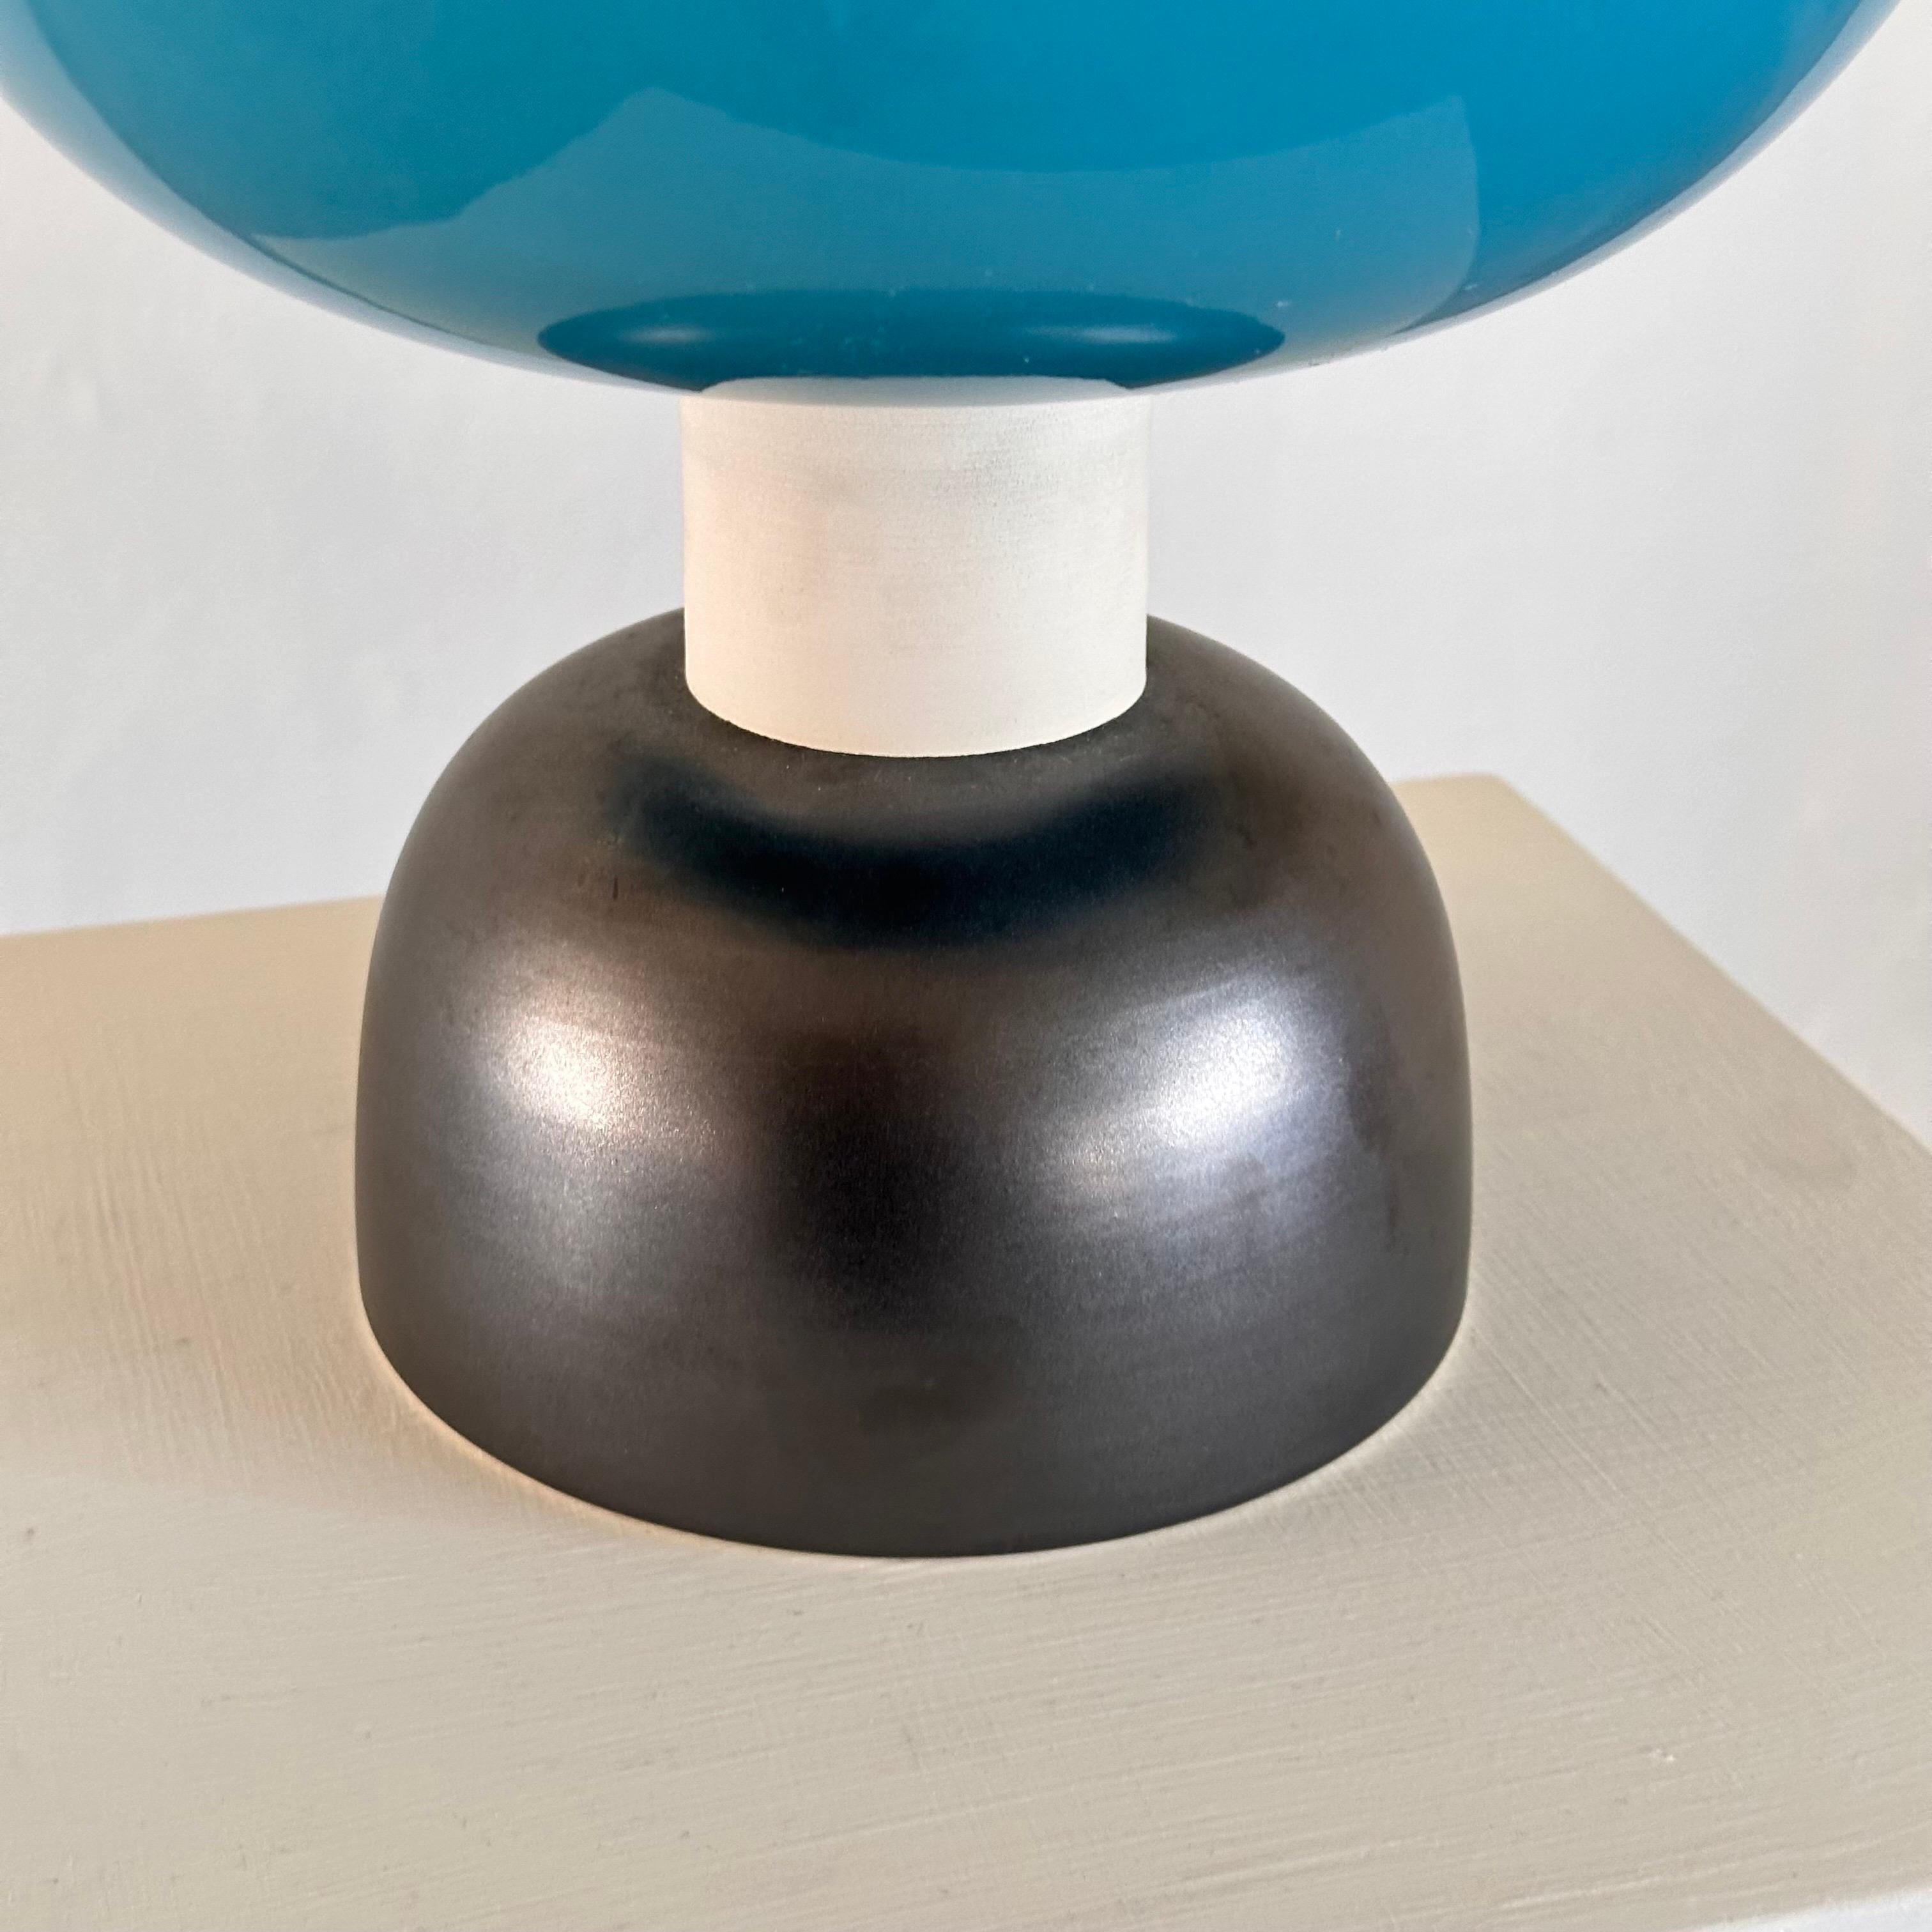 Italian Ettore Sottsass Stand in Gray and Light Blue Glazed Ceramic for Bitossi, 1960s For Sale